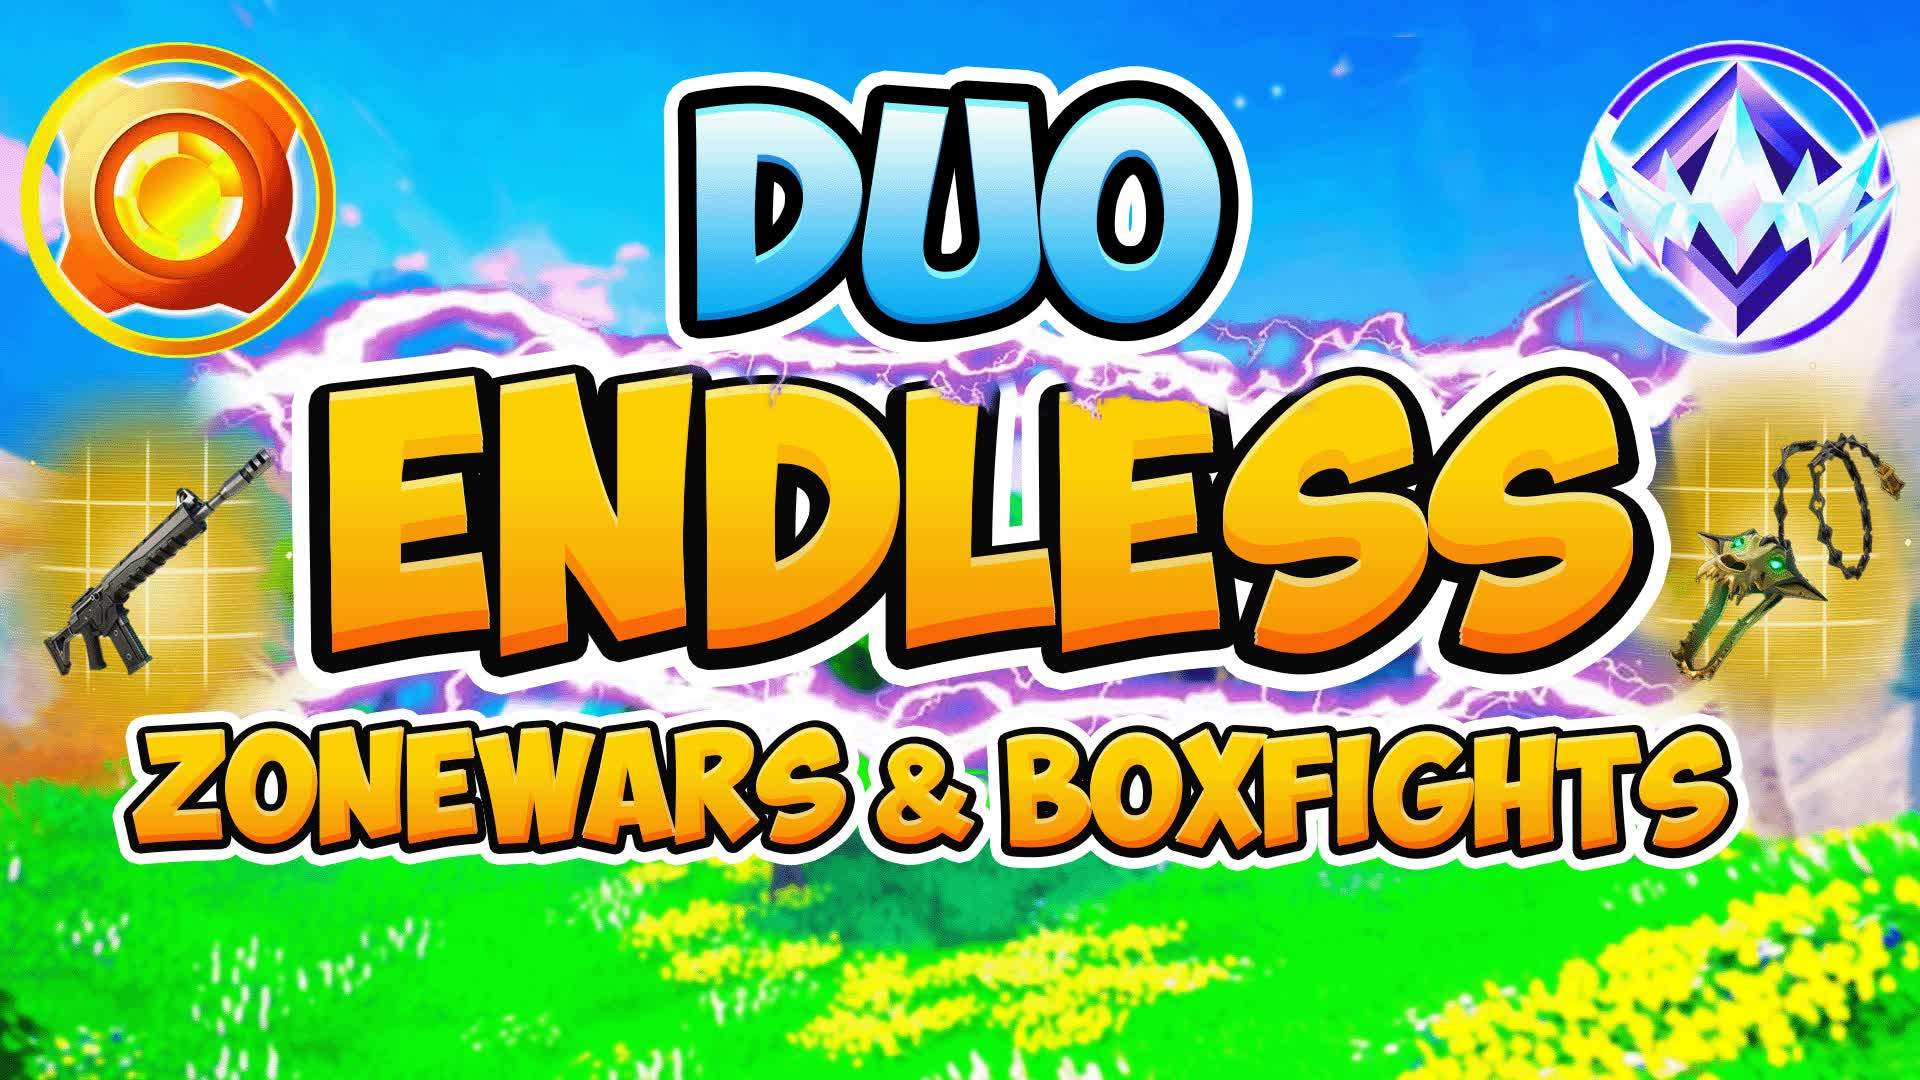 DUO ENDLESS ZONE WARS & BOX FIGHTS